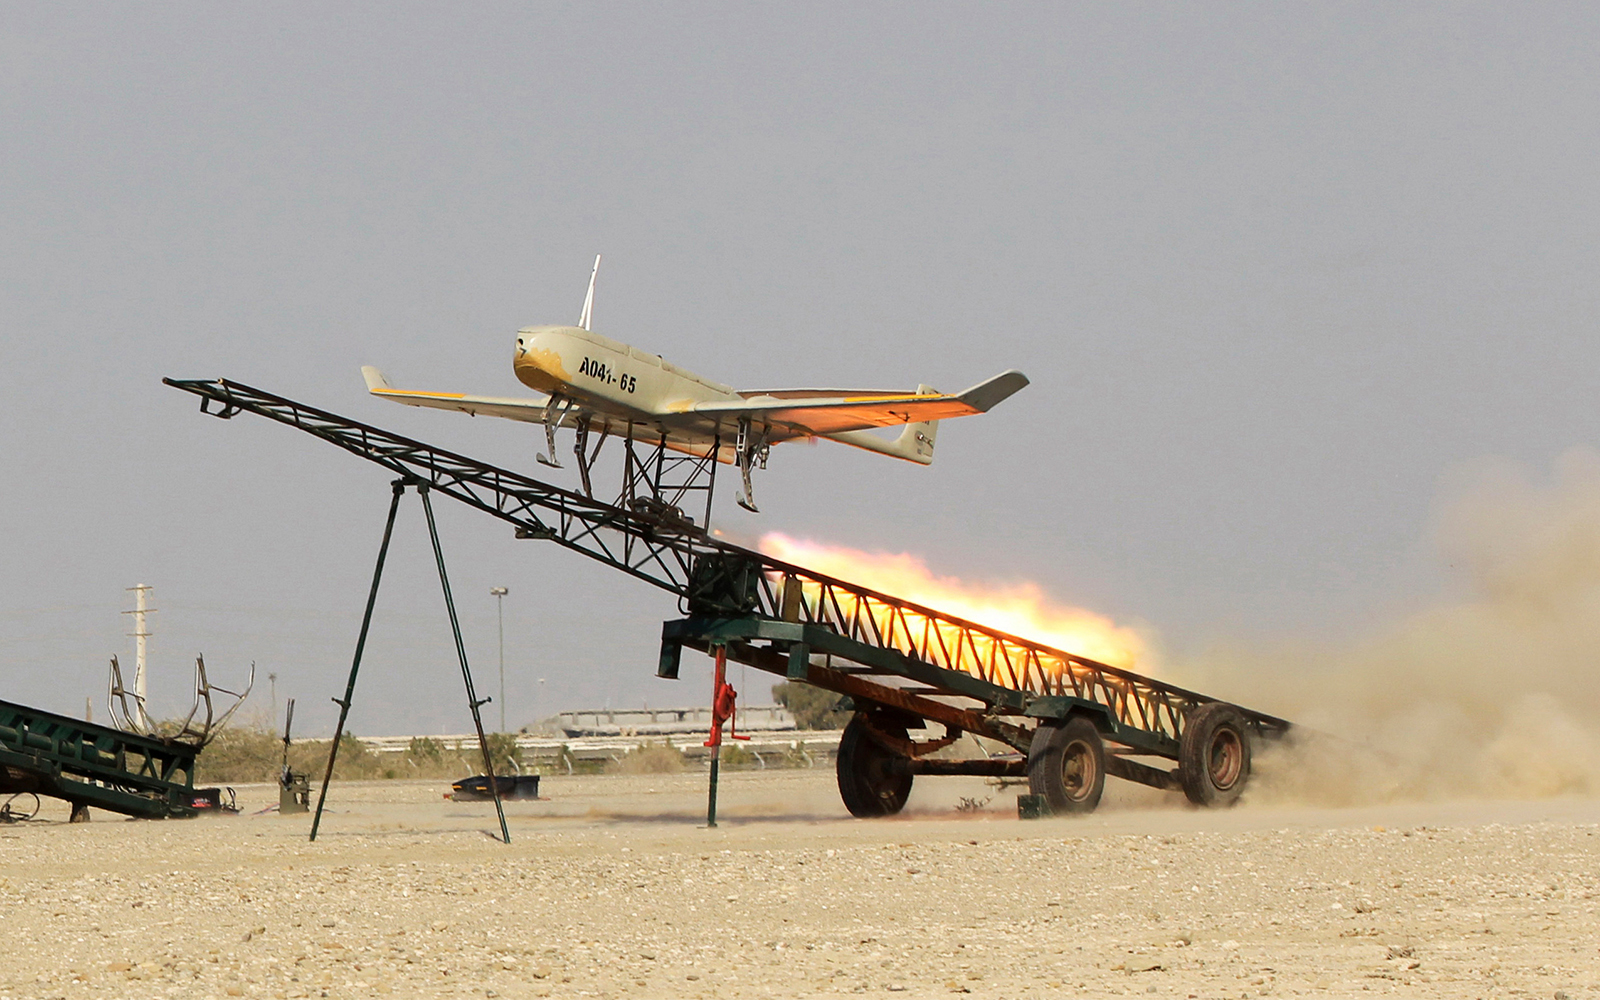 Do ProIranian factions fly drone into Israel